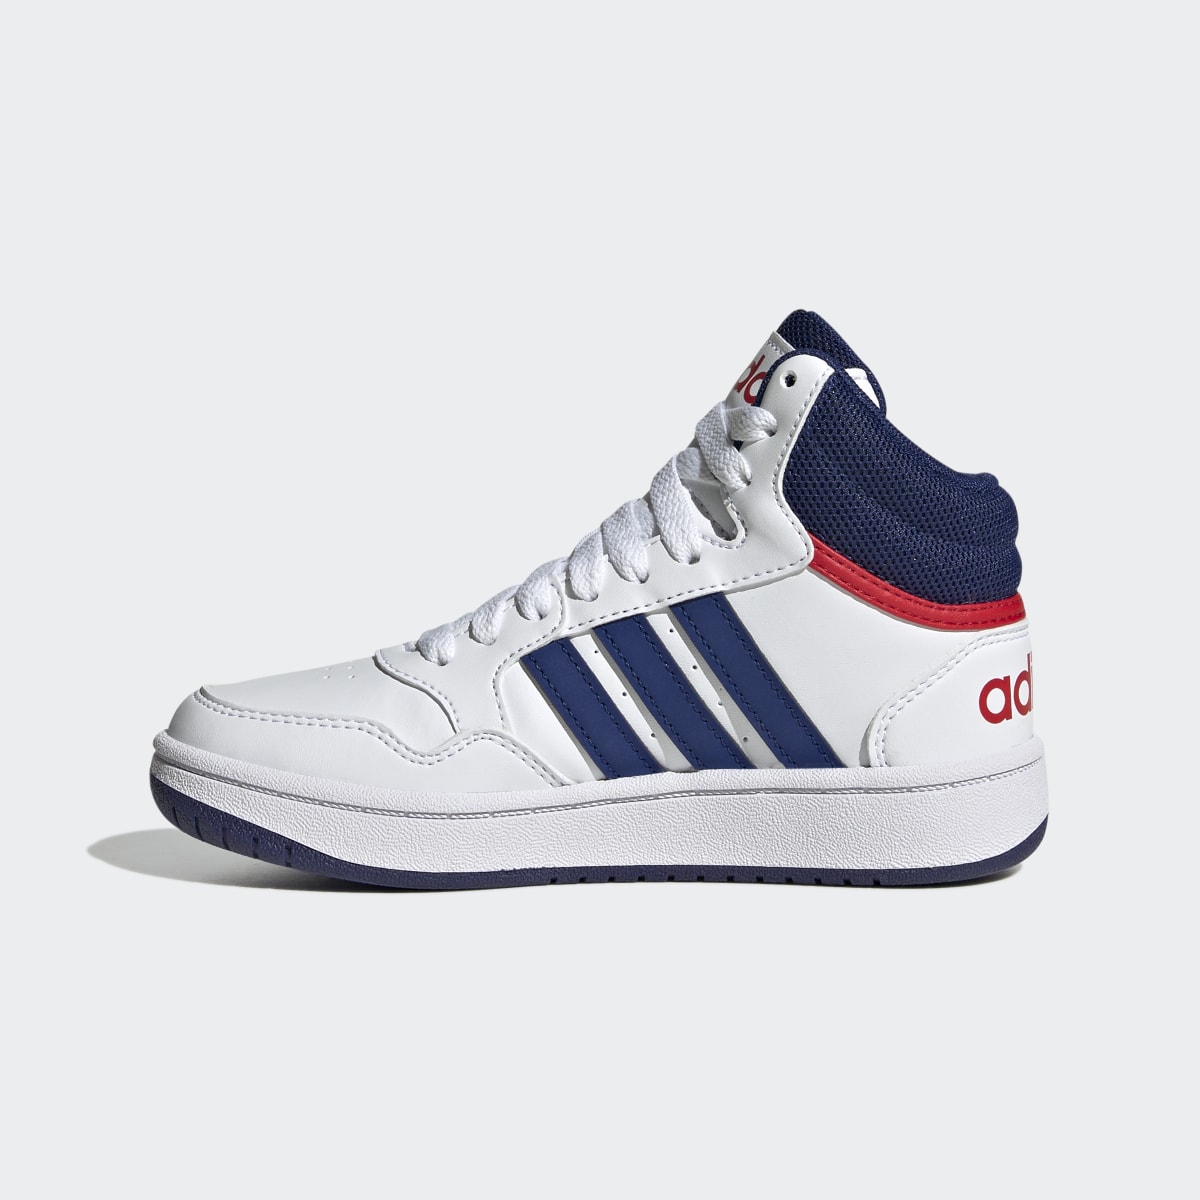 Adidas Hoops Mid Shoes. 7